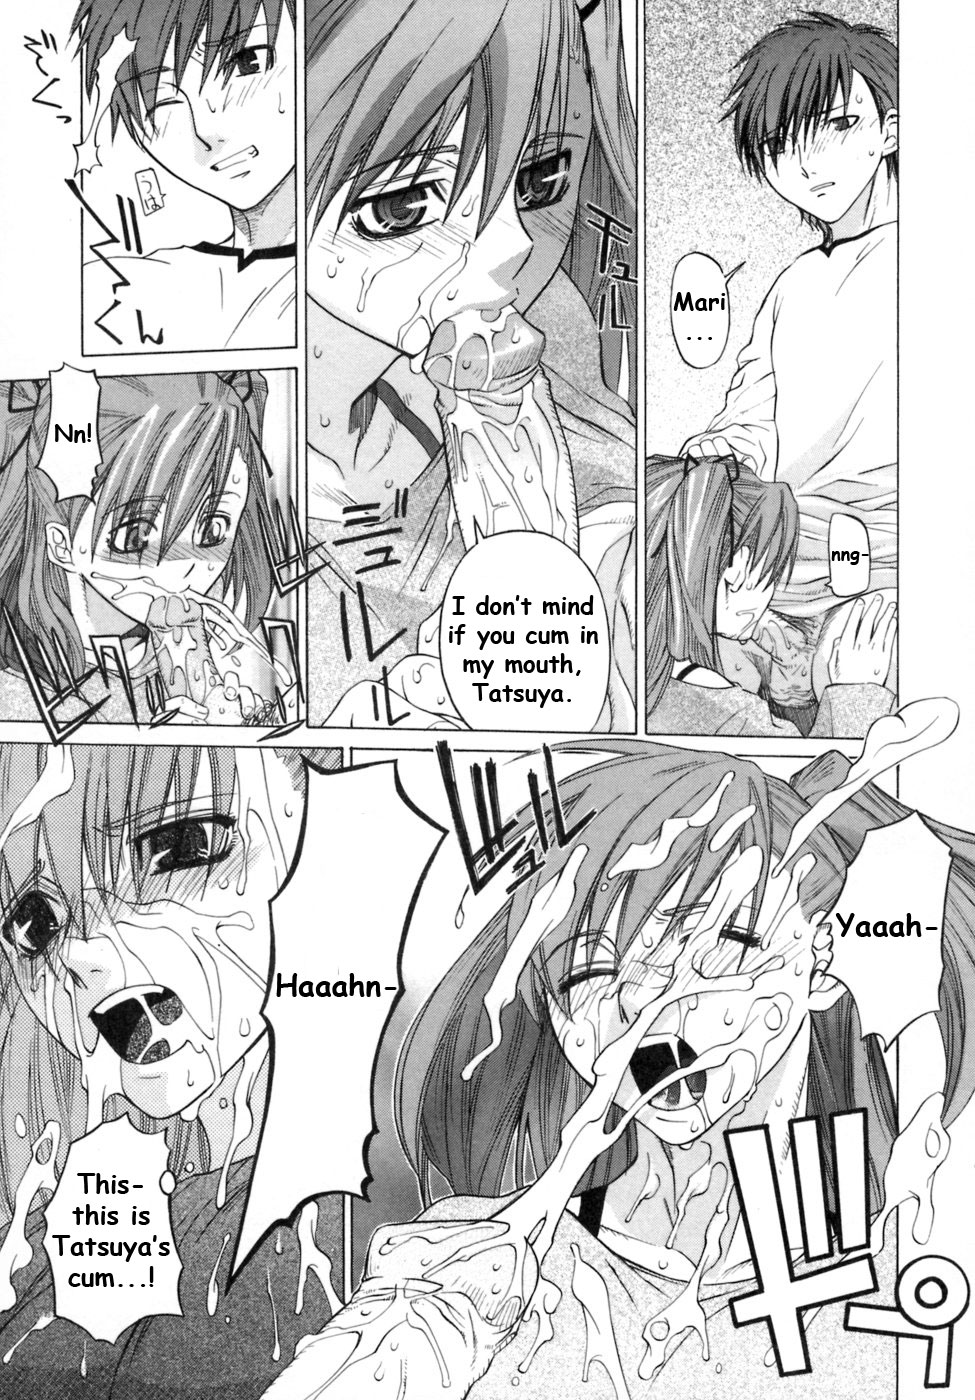 [Ootsuka Kotora] Kanojo no honne. - Her True Colors [English] [Filthy-H + CiRE's Mangas + Sling] page 17 full